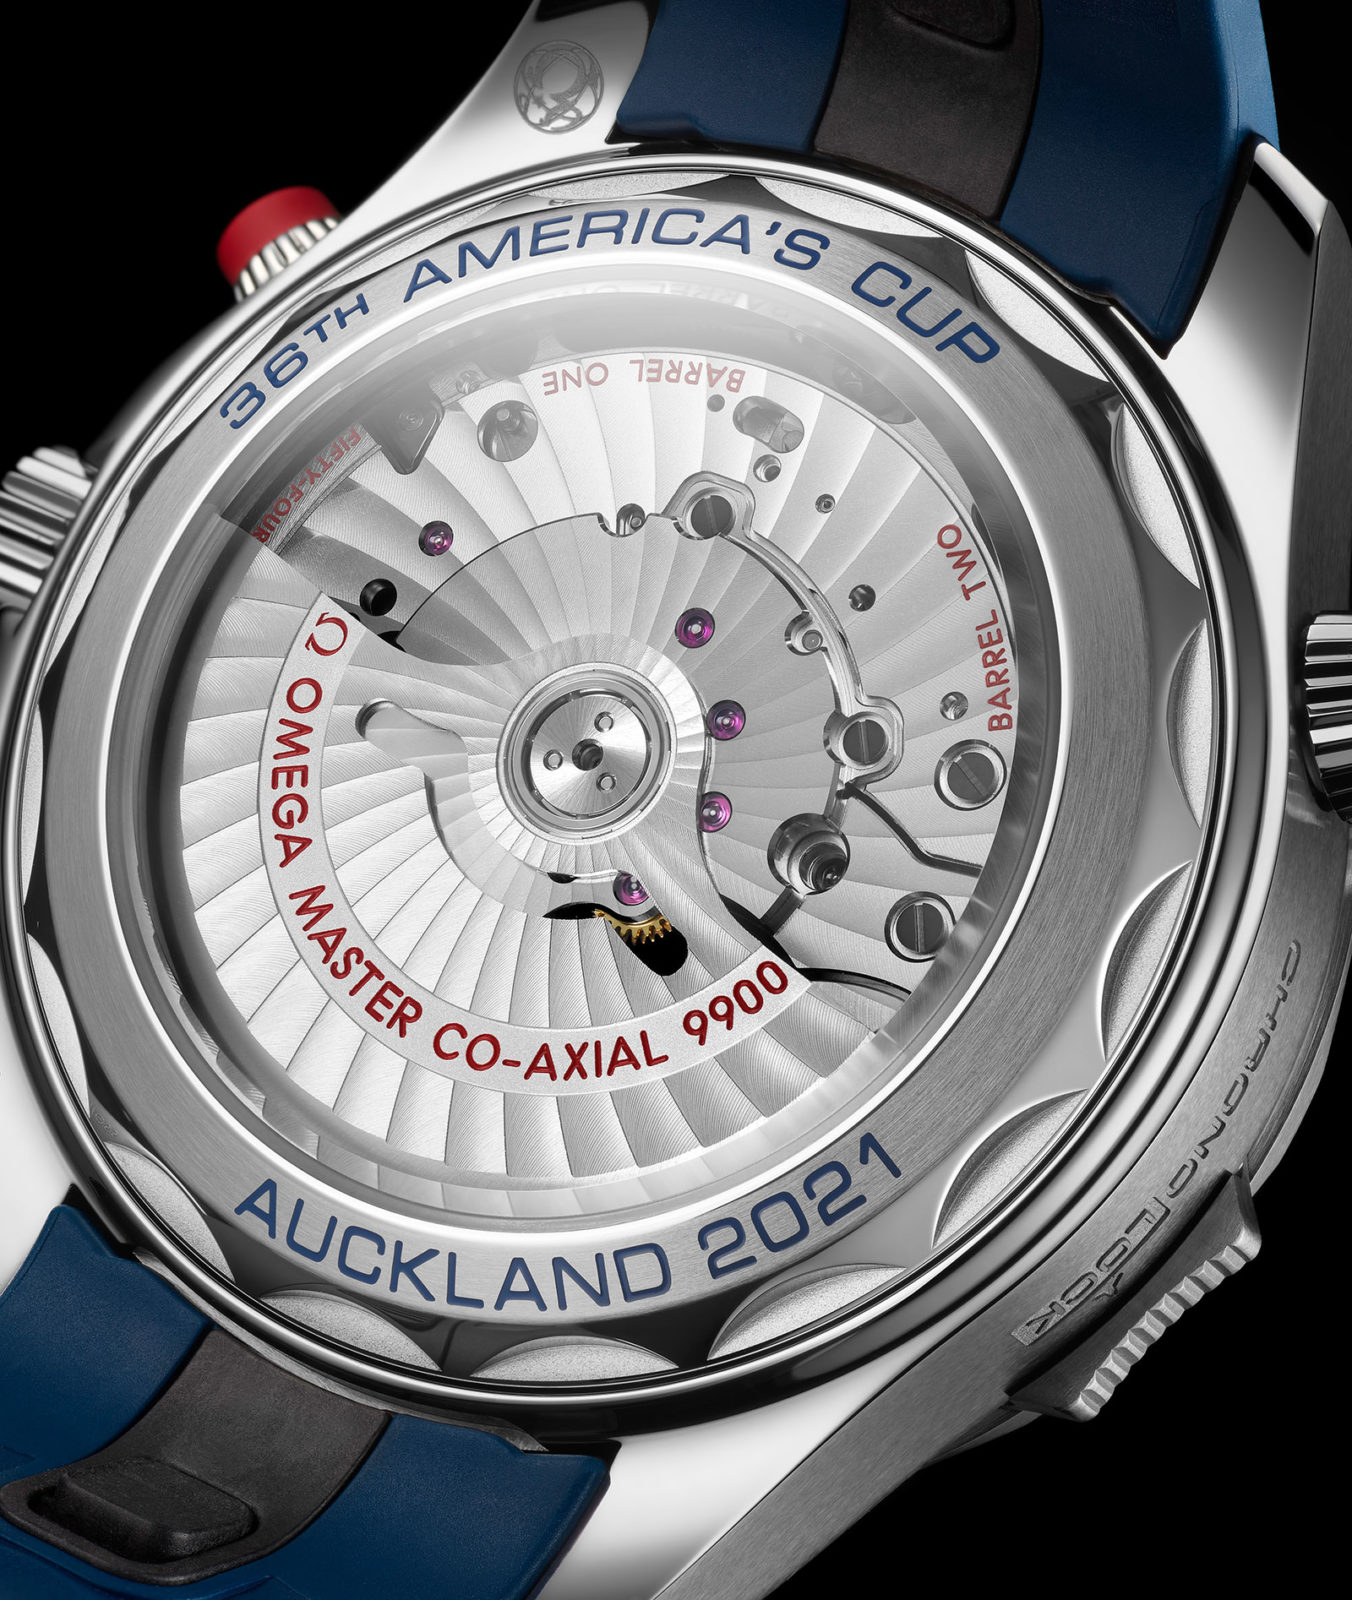 Omega] 2021 America's Cup : r/Watches